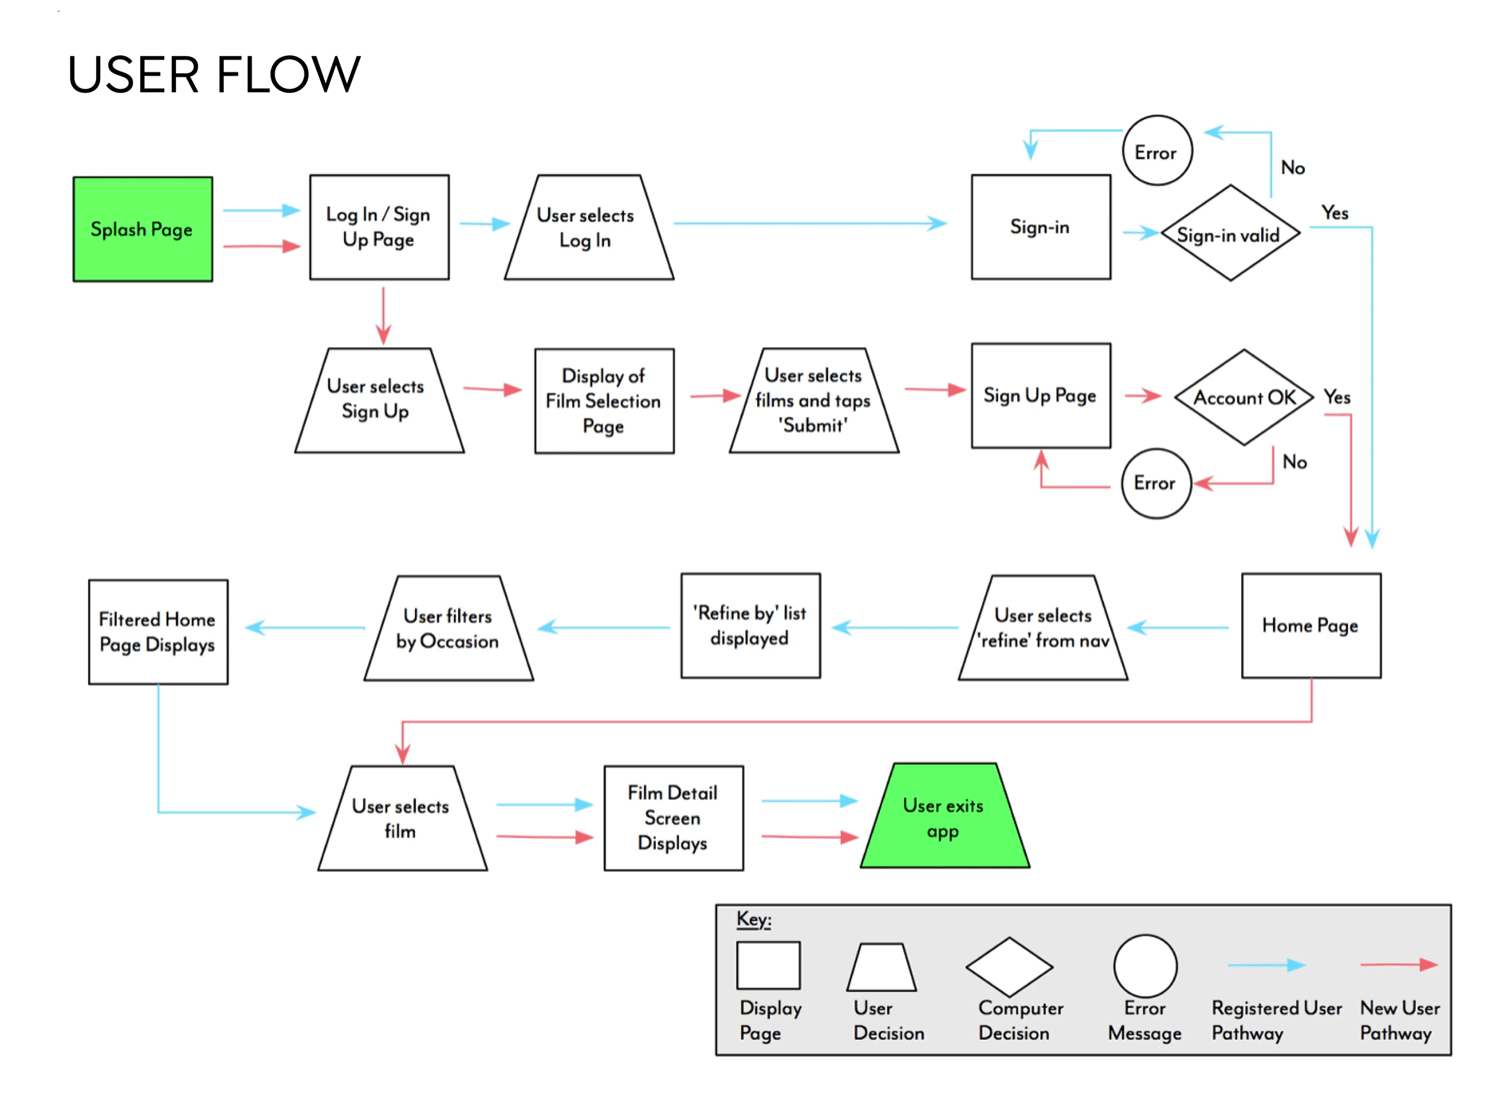 User flows with legend key